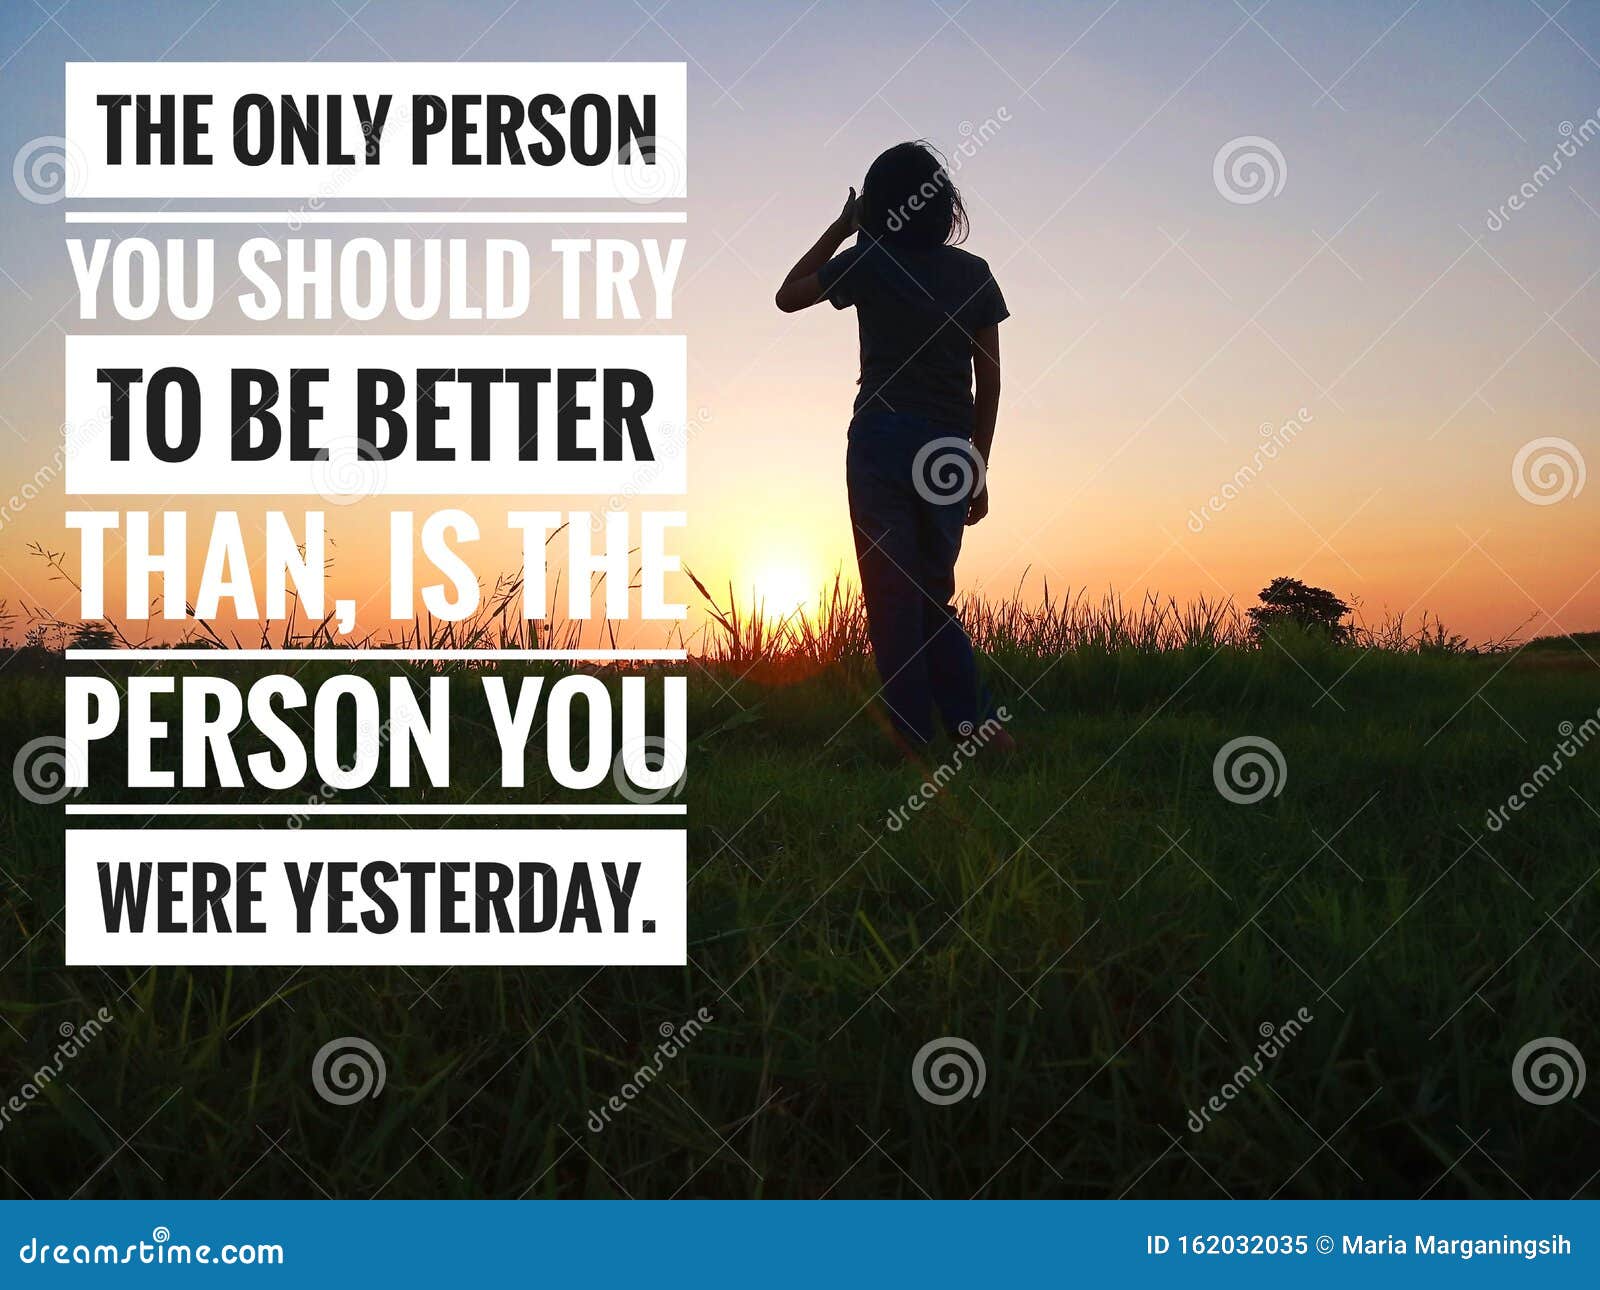 inspirational motivational quote - the only person you should be better than, is the person you were yesterday.